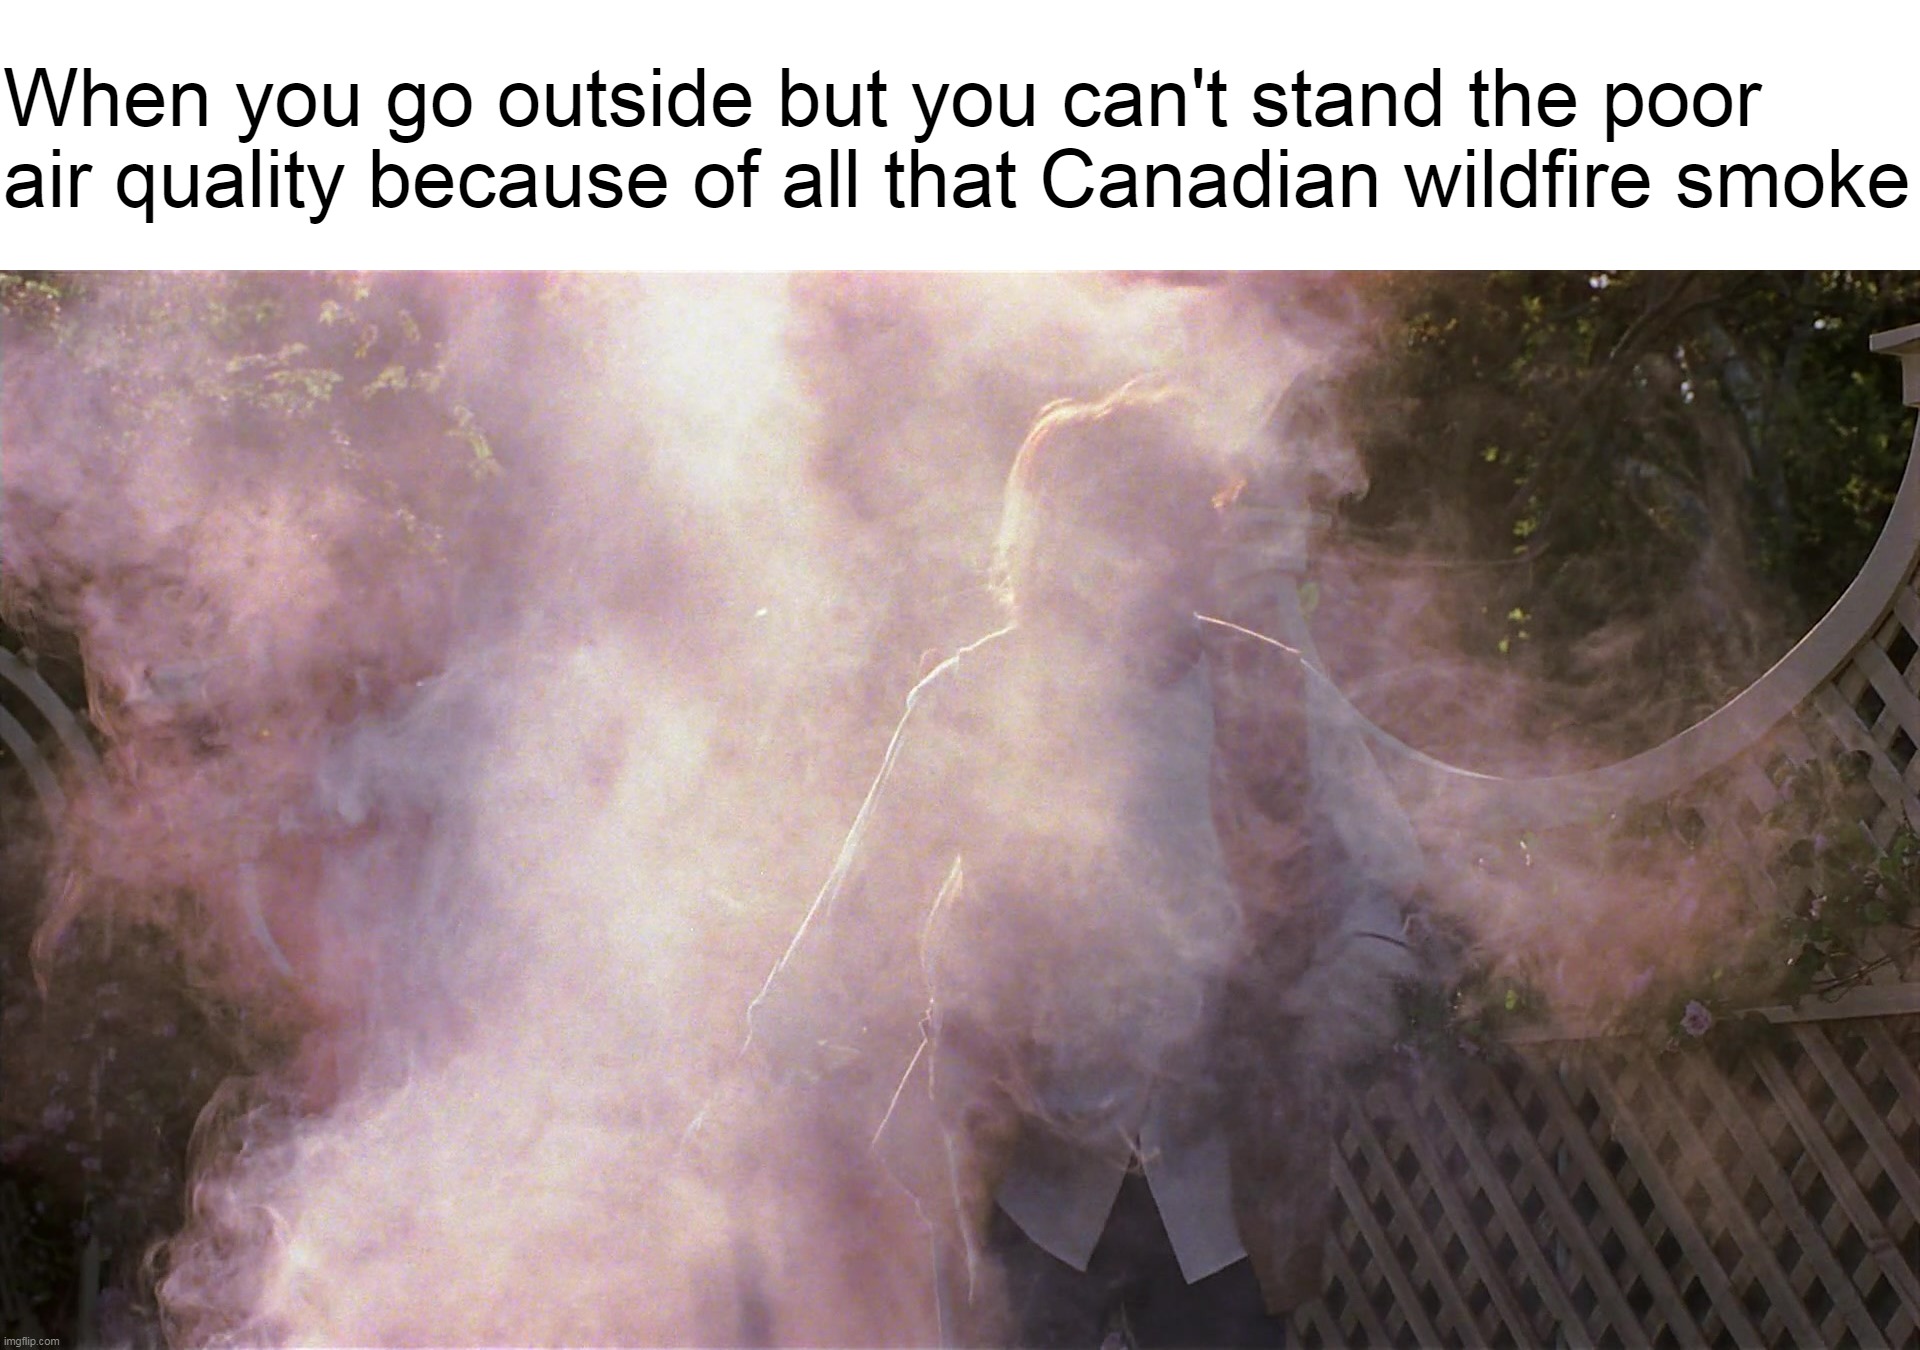 When you go outside but you can't stand the poor air quality because of all that Canadian wildfire smoke | image tagged in meme,memes,relatable,wildfires,smoke,canadian wildfires | made w/ Imgflip meme maker